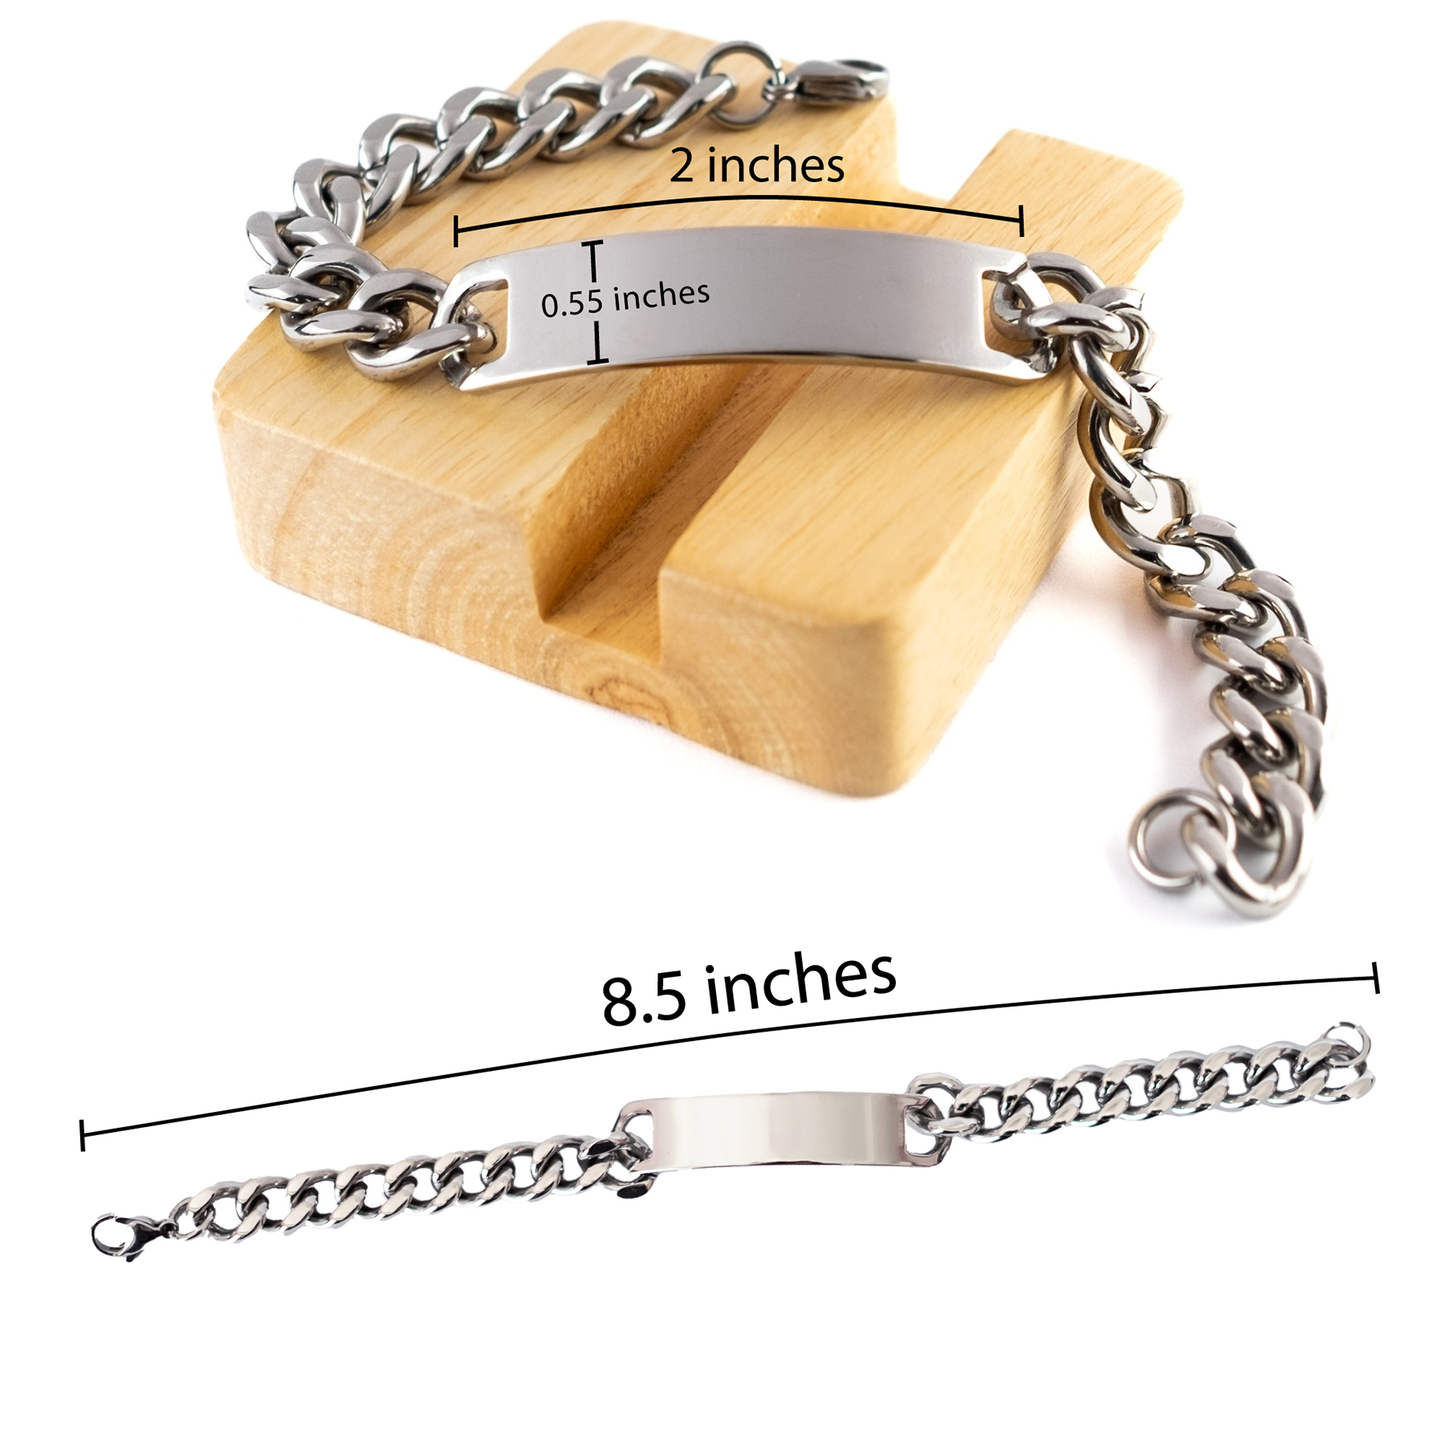 Nephew Motivational Gifts from Tio, Remember to never give up no matter what, Inspirational Birthday Cuban Chain Stainless Steel Bracelet for Nephew